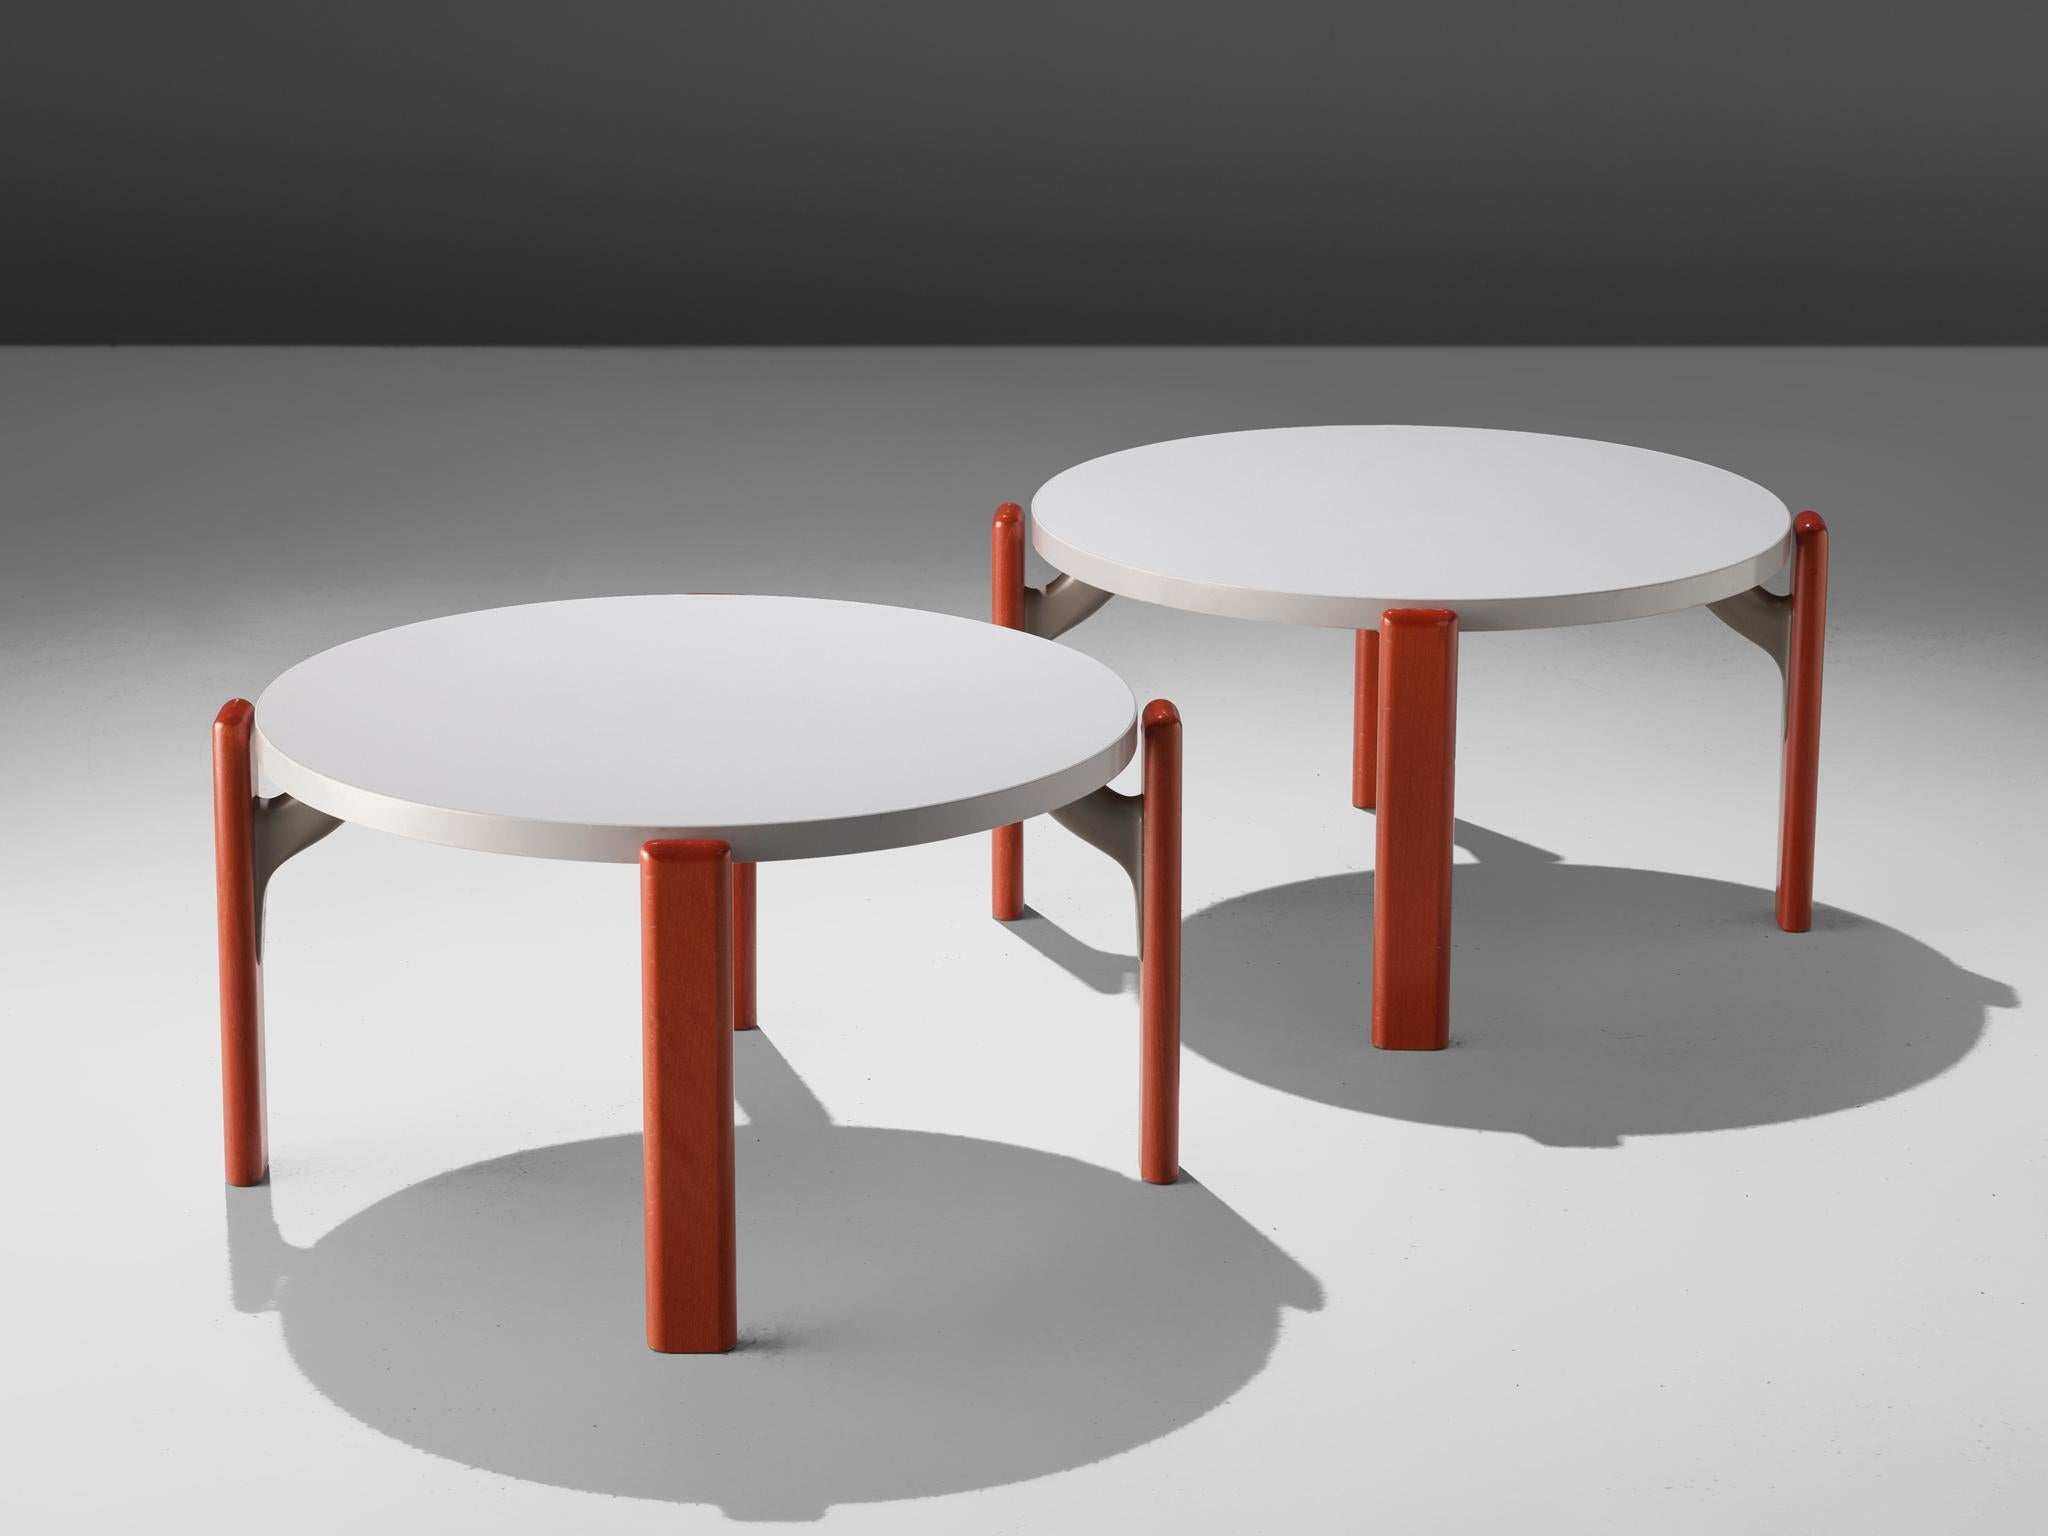 Bruno Rey for Dietiker, pair of coffee tables, plywood, Switzerland, 1970s

These coffee tables feature four red lacquered wooden legs and a round white table top. A grey connection hold the legs and the top together. Special features it the